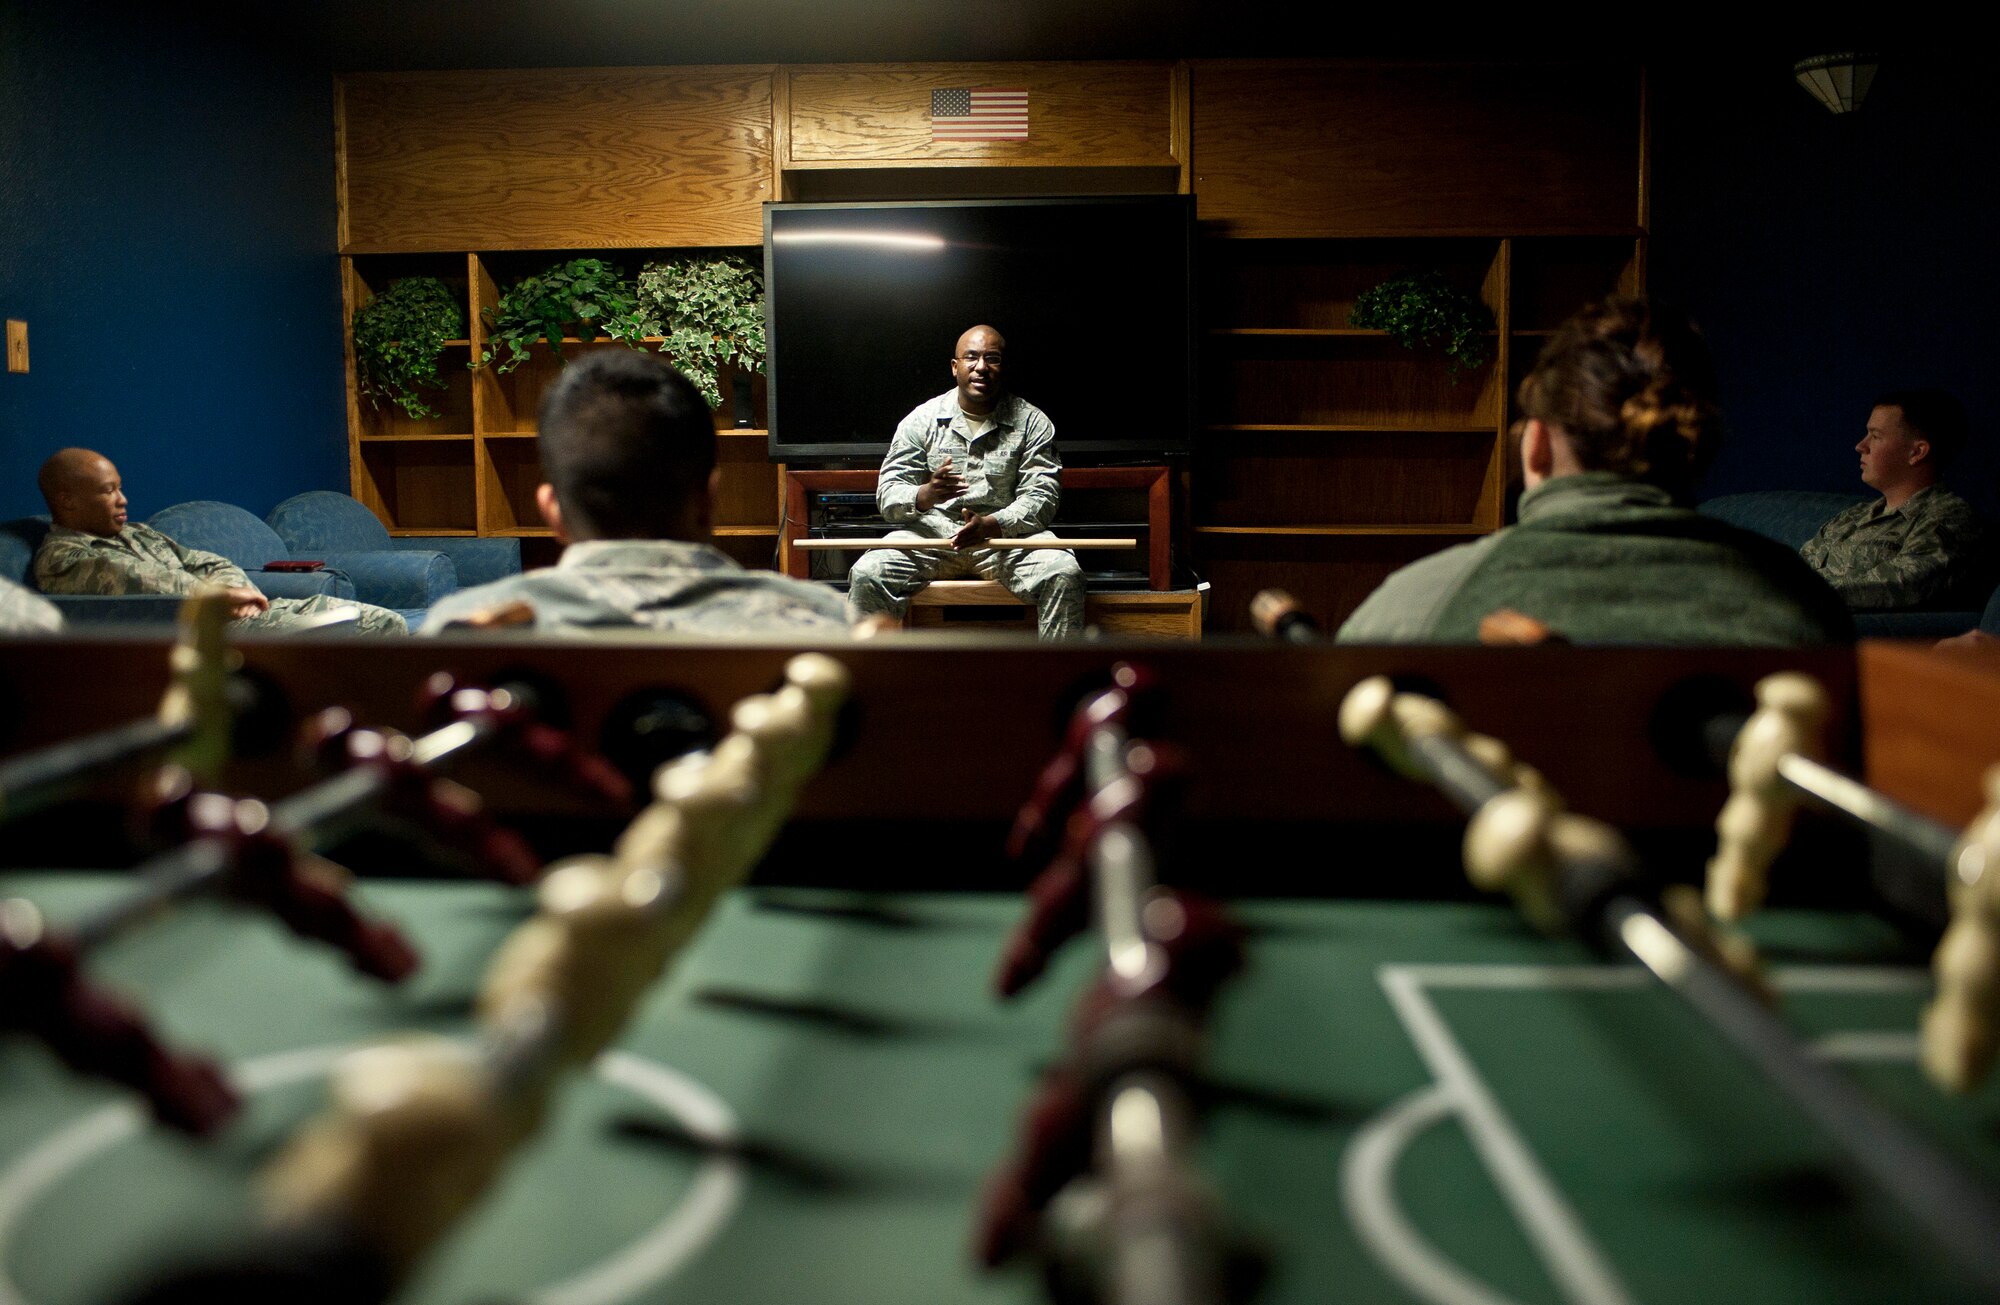 Staff Sgt. Council Jones, 99th Civil Engineer Squadron airman dormitory leader, talks to a group of Airmen at Nellis Air Force Base, Nev., April 7, 2015. Jones credits his mentors with his success in the Air Force, and now passes on what he can to younger Airmen. (U.S. Air Force photo by Staff Sgt. Siuta B. Ika)